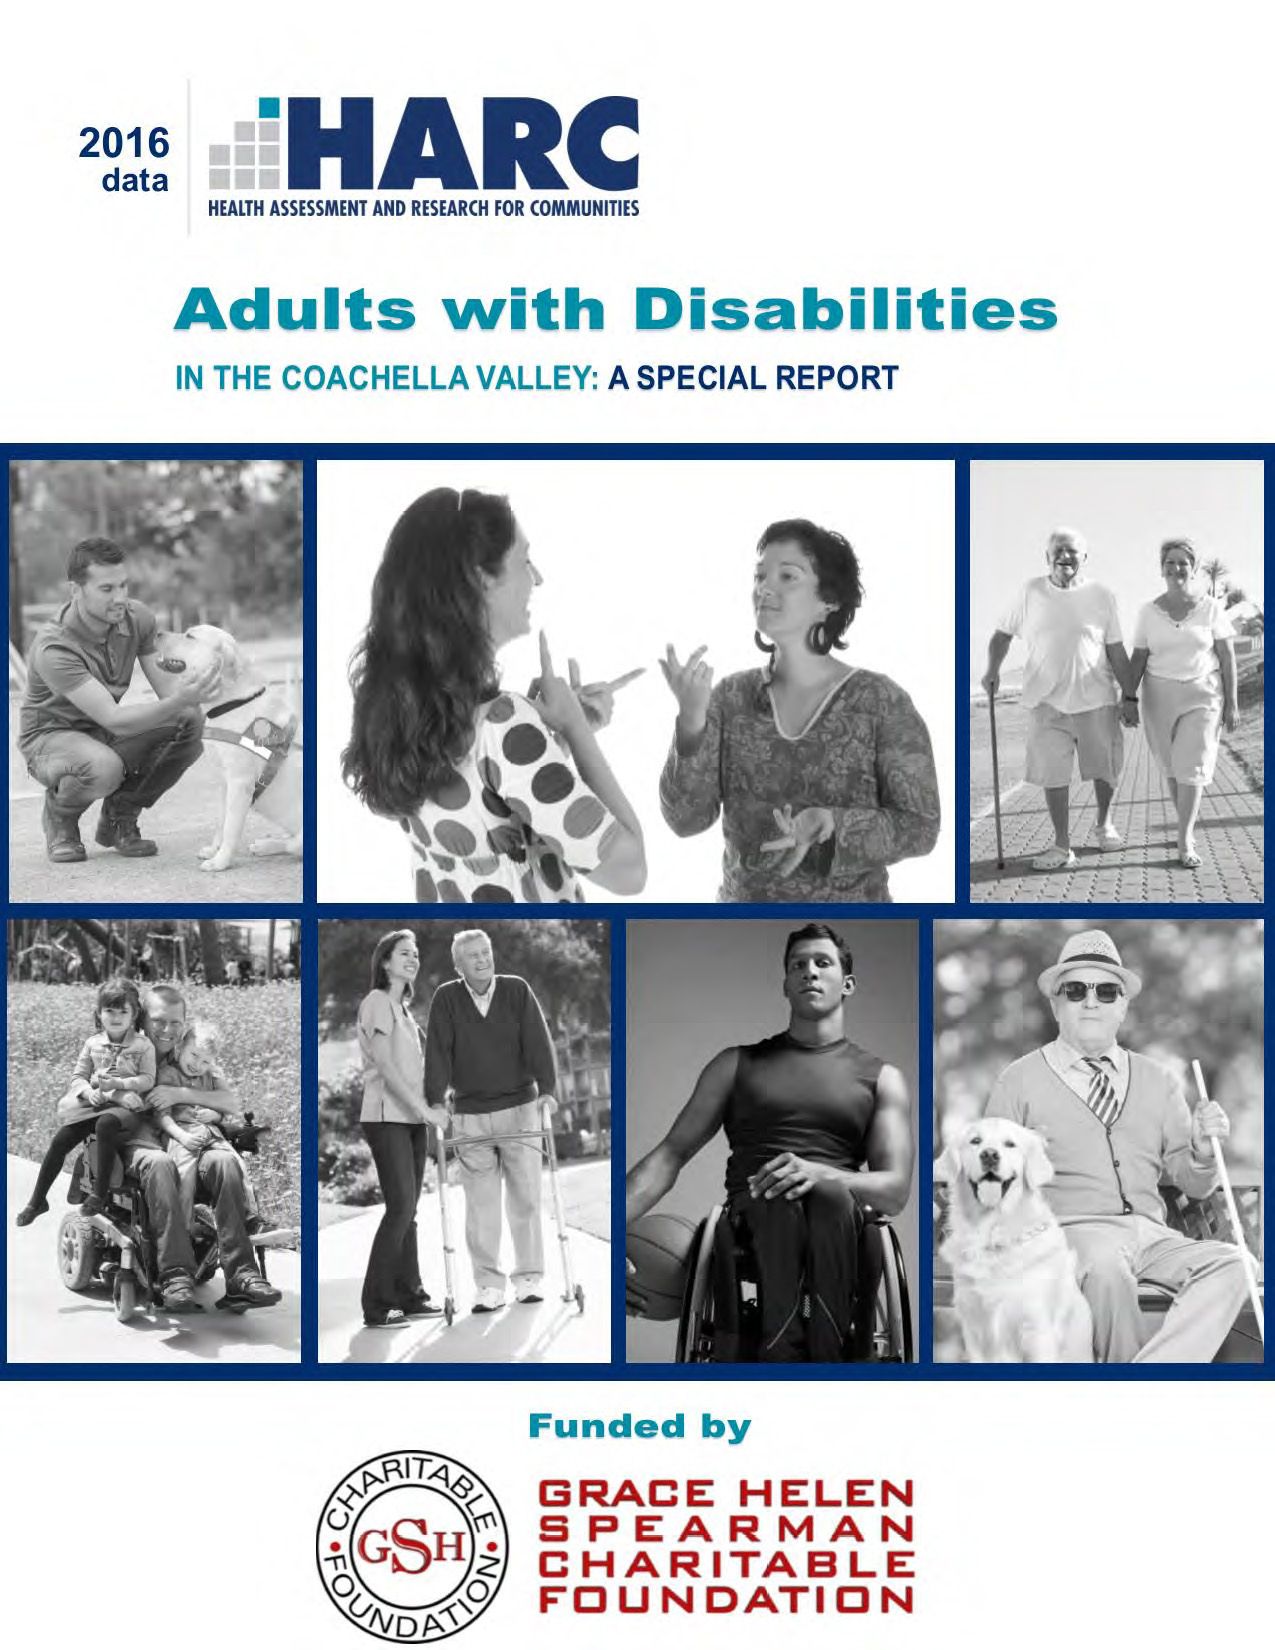 2018 Special Report on Adults with Disabilities in the Coachella Valley Funded by Grace Helen Spearman Charitable Foundation